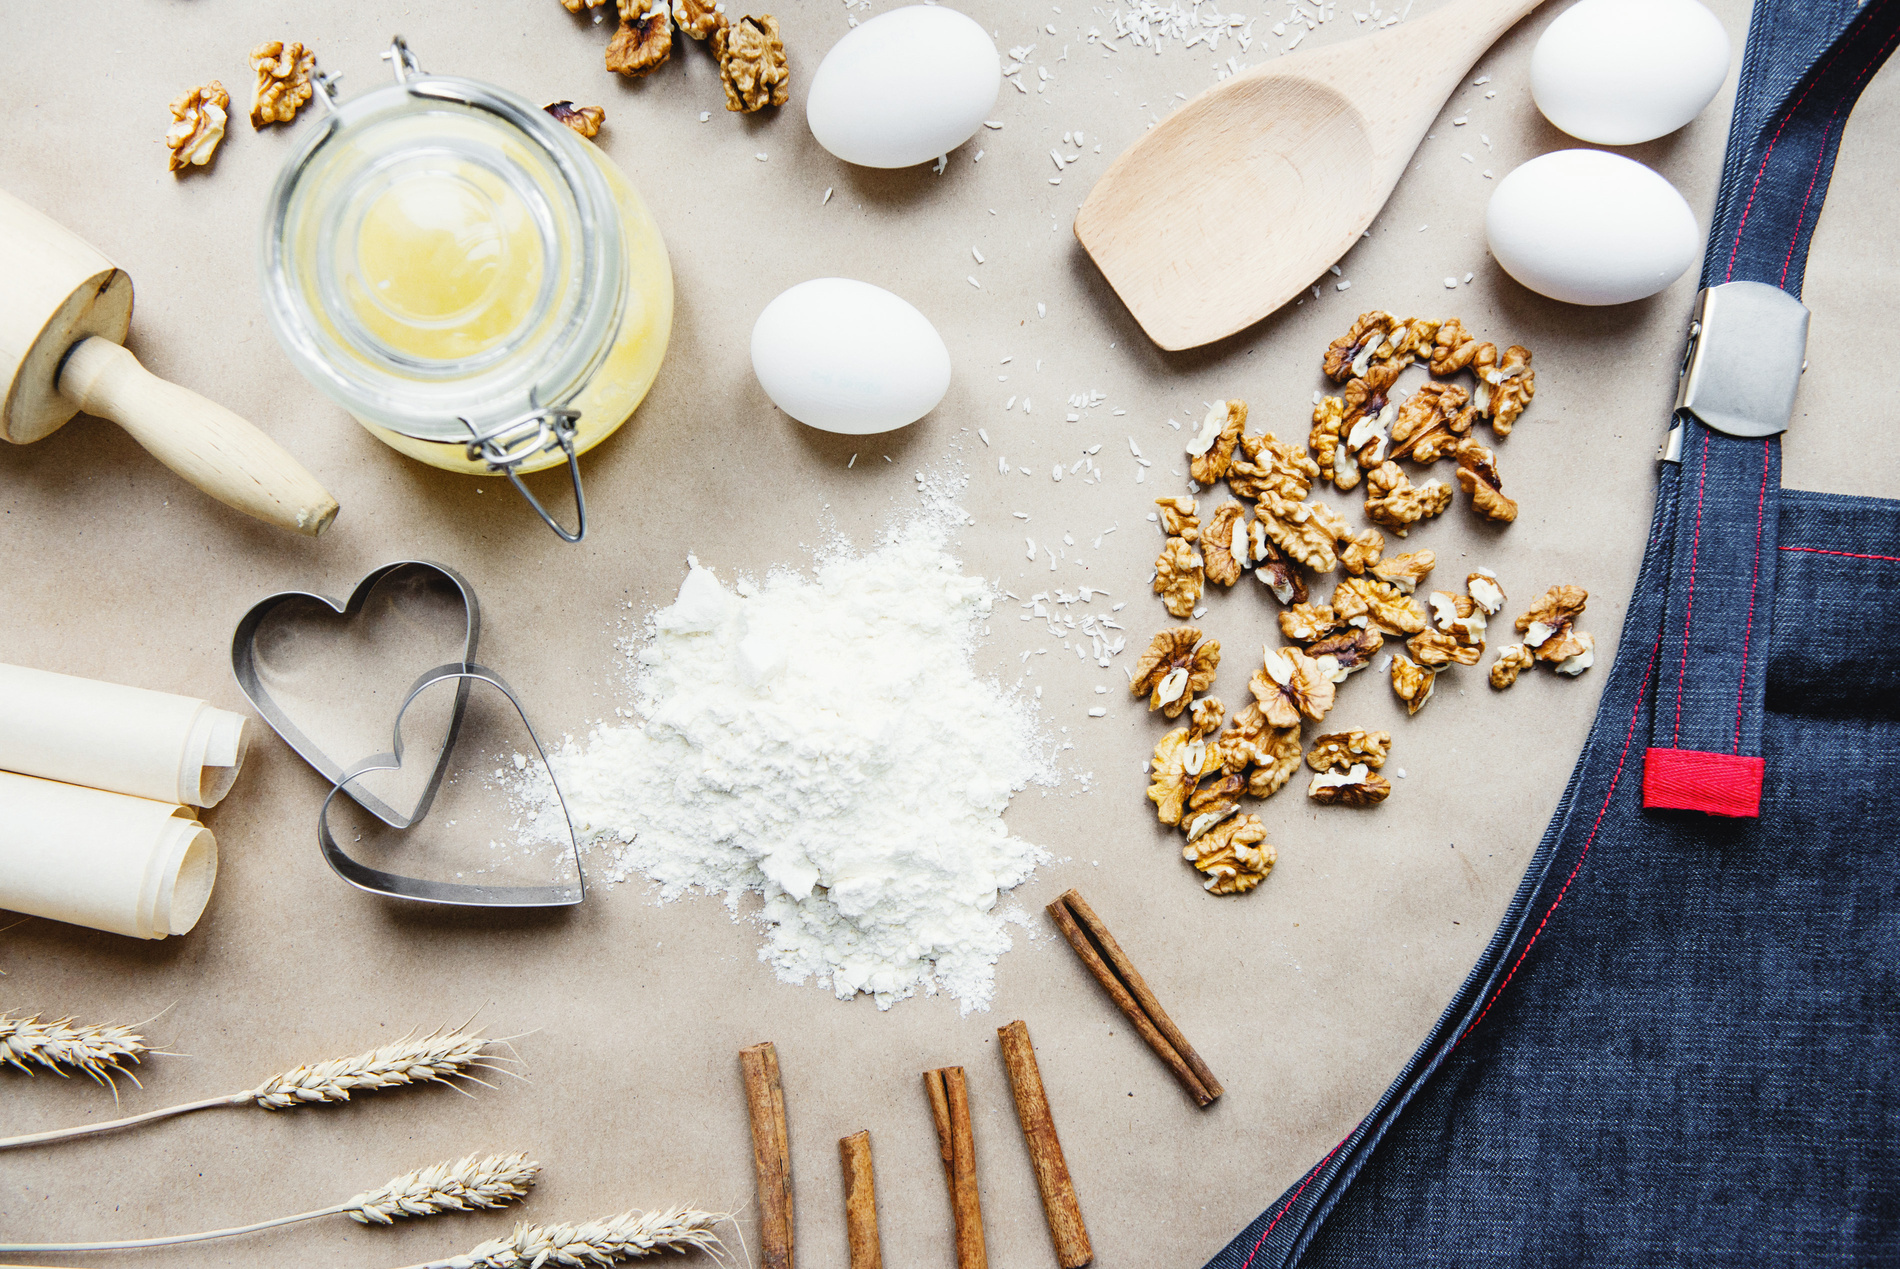 Composition of Baking Ingredients